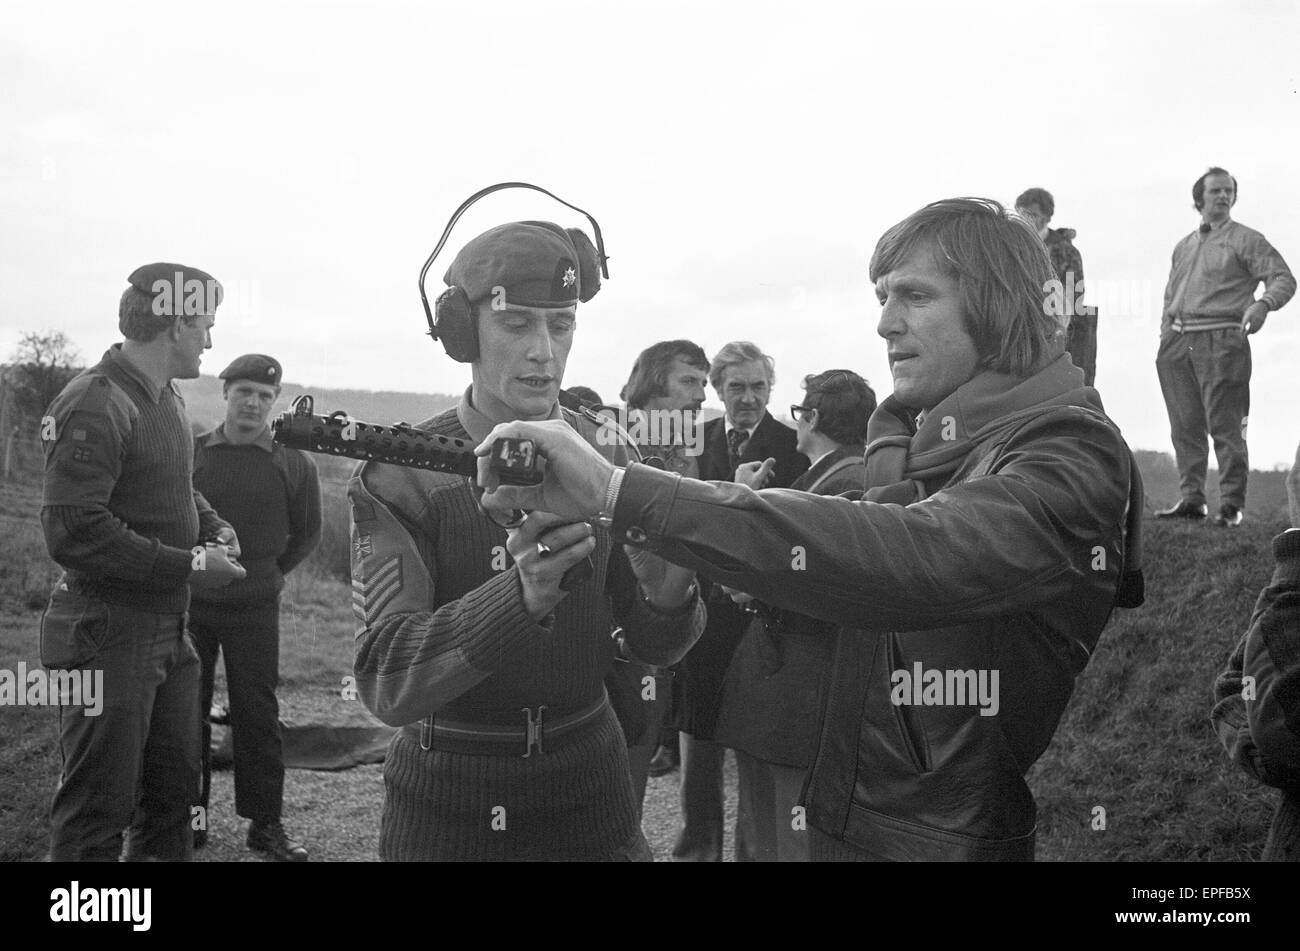 Southampton FC Players, holders of the FA Cup, tried their hands at a different sort of shooting when they paid a visit to the Royal Anglian Regiment, on Salisbury Plain, Thursday 25th November 1976. Stock Photo